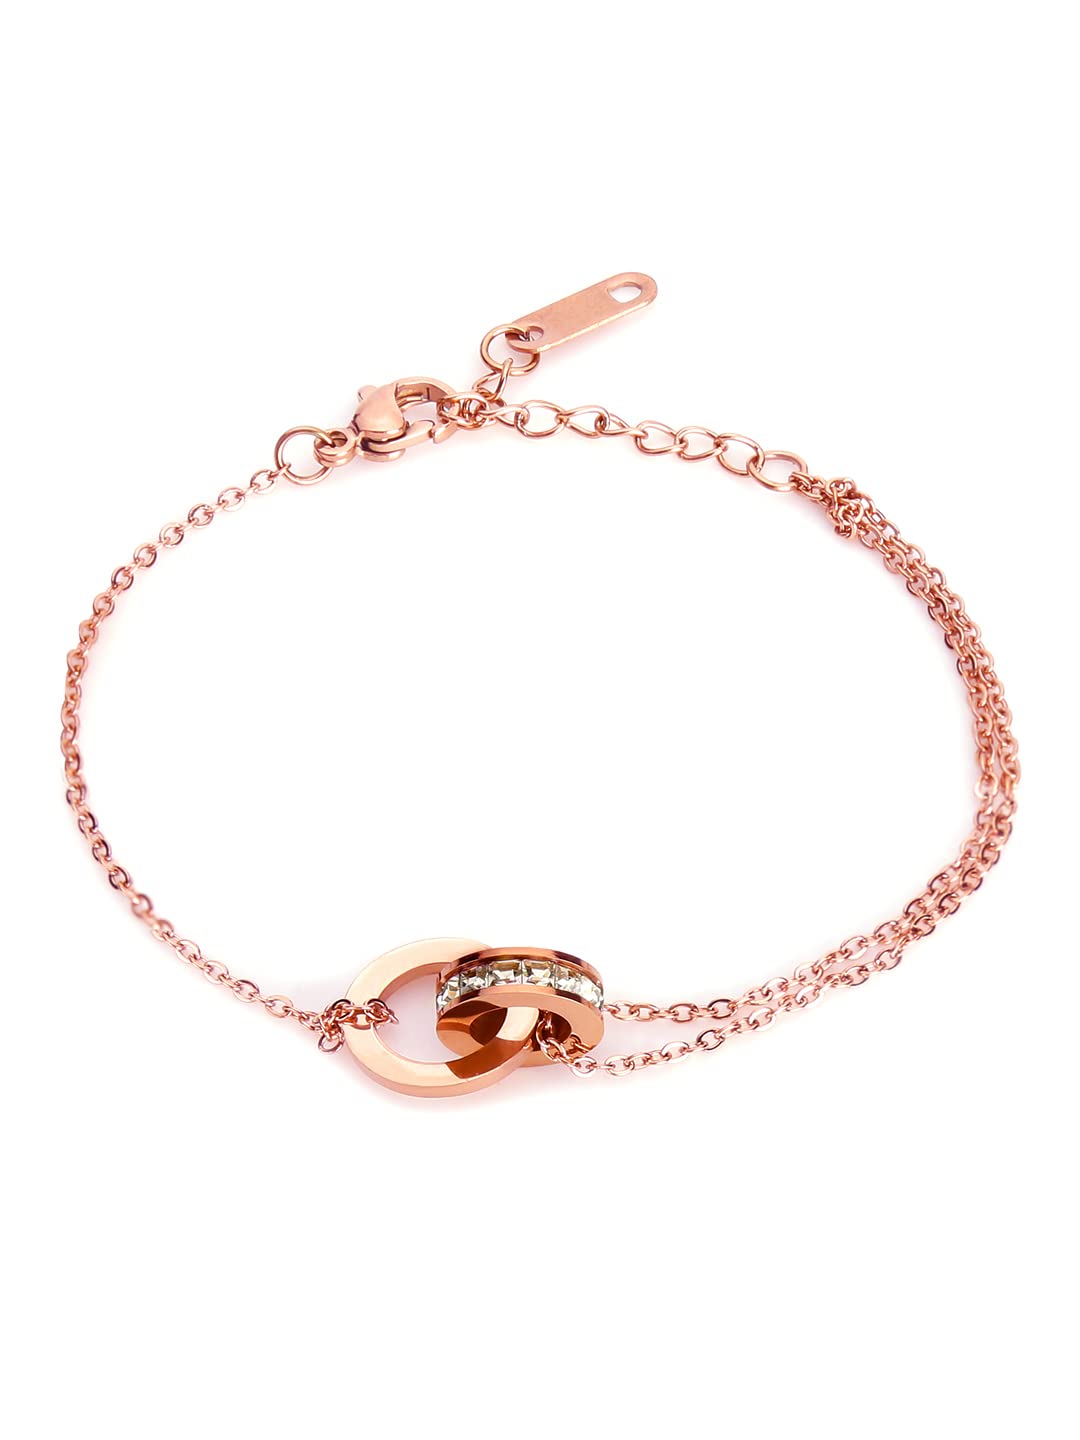 Buy Pandora Rose Gold Bracelet. 20cm With All Charms. Online in India - Etsy